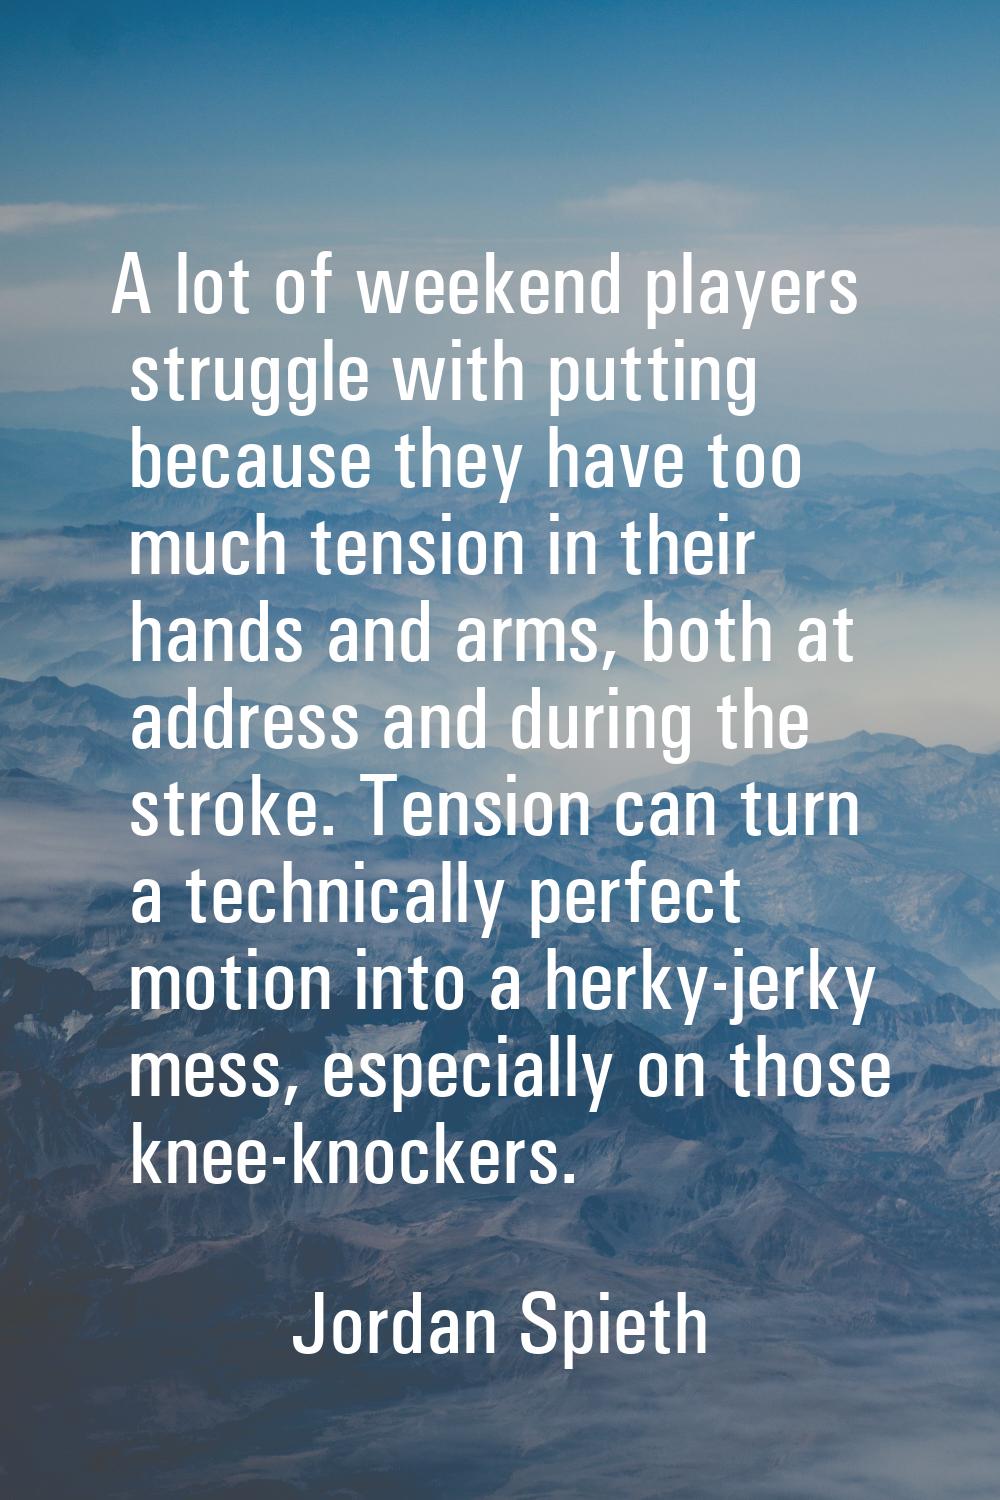 A lot of weekend players struggle with putting because they have too much tension in their hands an